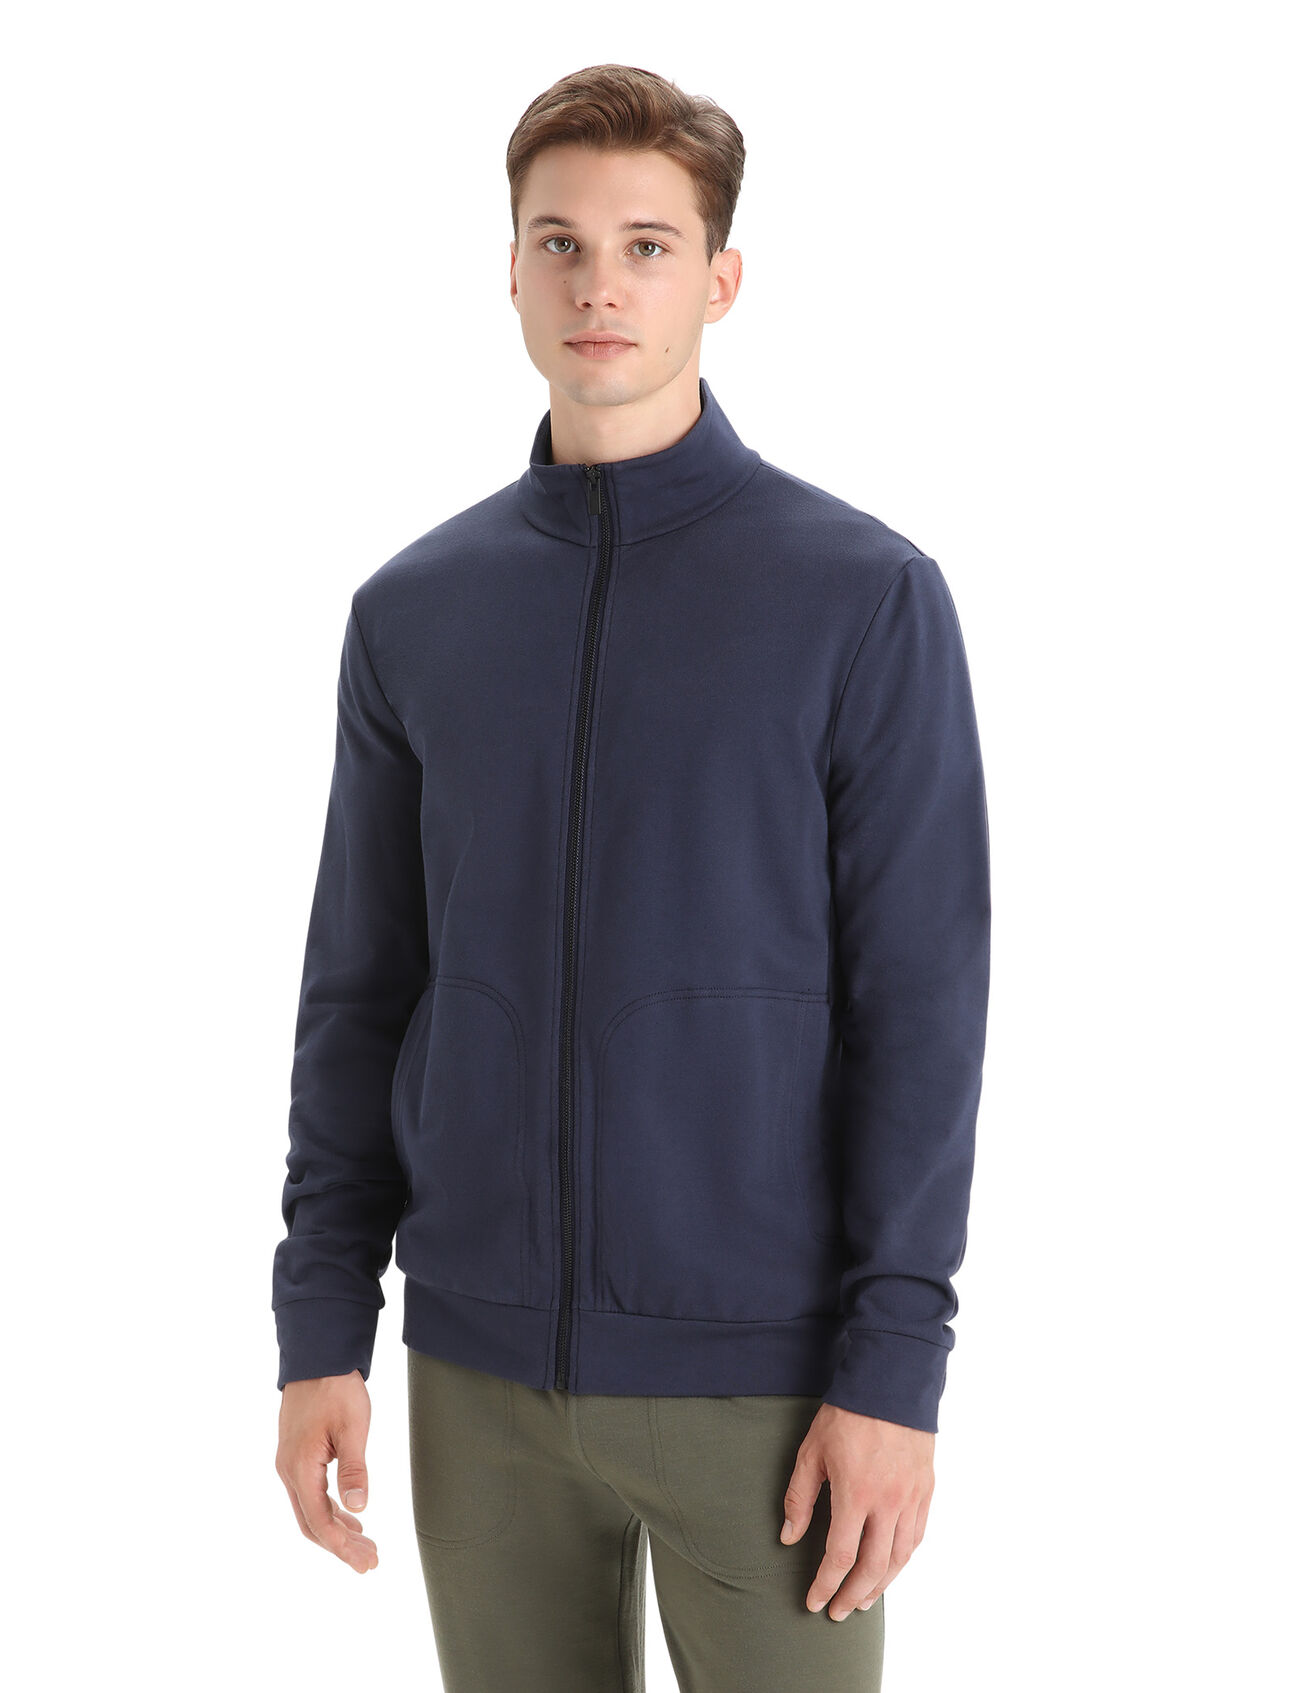 Mens Merino Central Classic Long Sleeve Zip A clean, classic and comfortable everyday sweatshirt that blends natural merino wool with organic cotton, the Central Classic Long Sleeve Zip is durable, breathable and incredibly versatile.